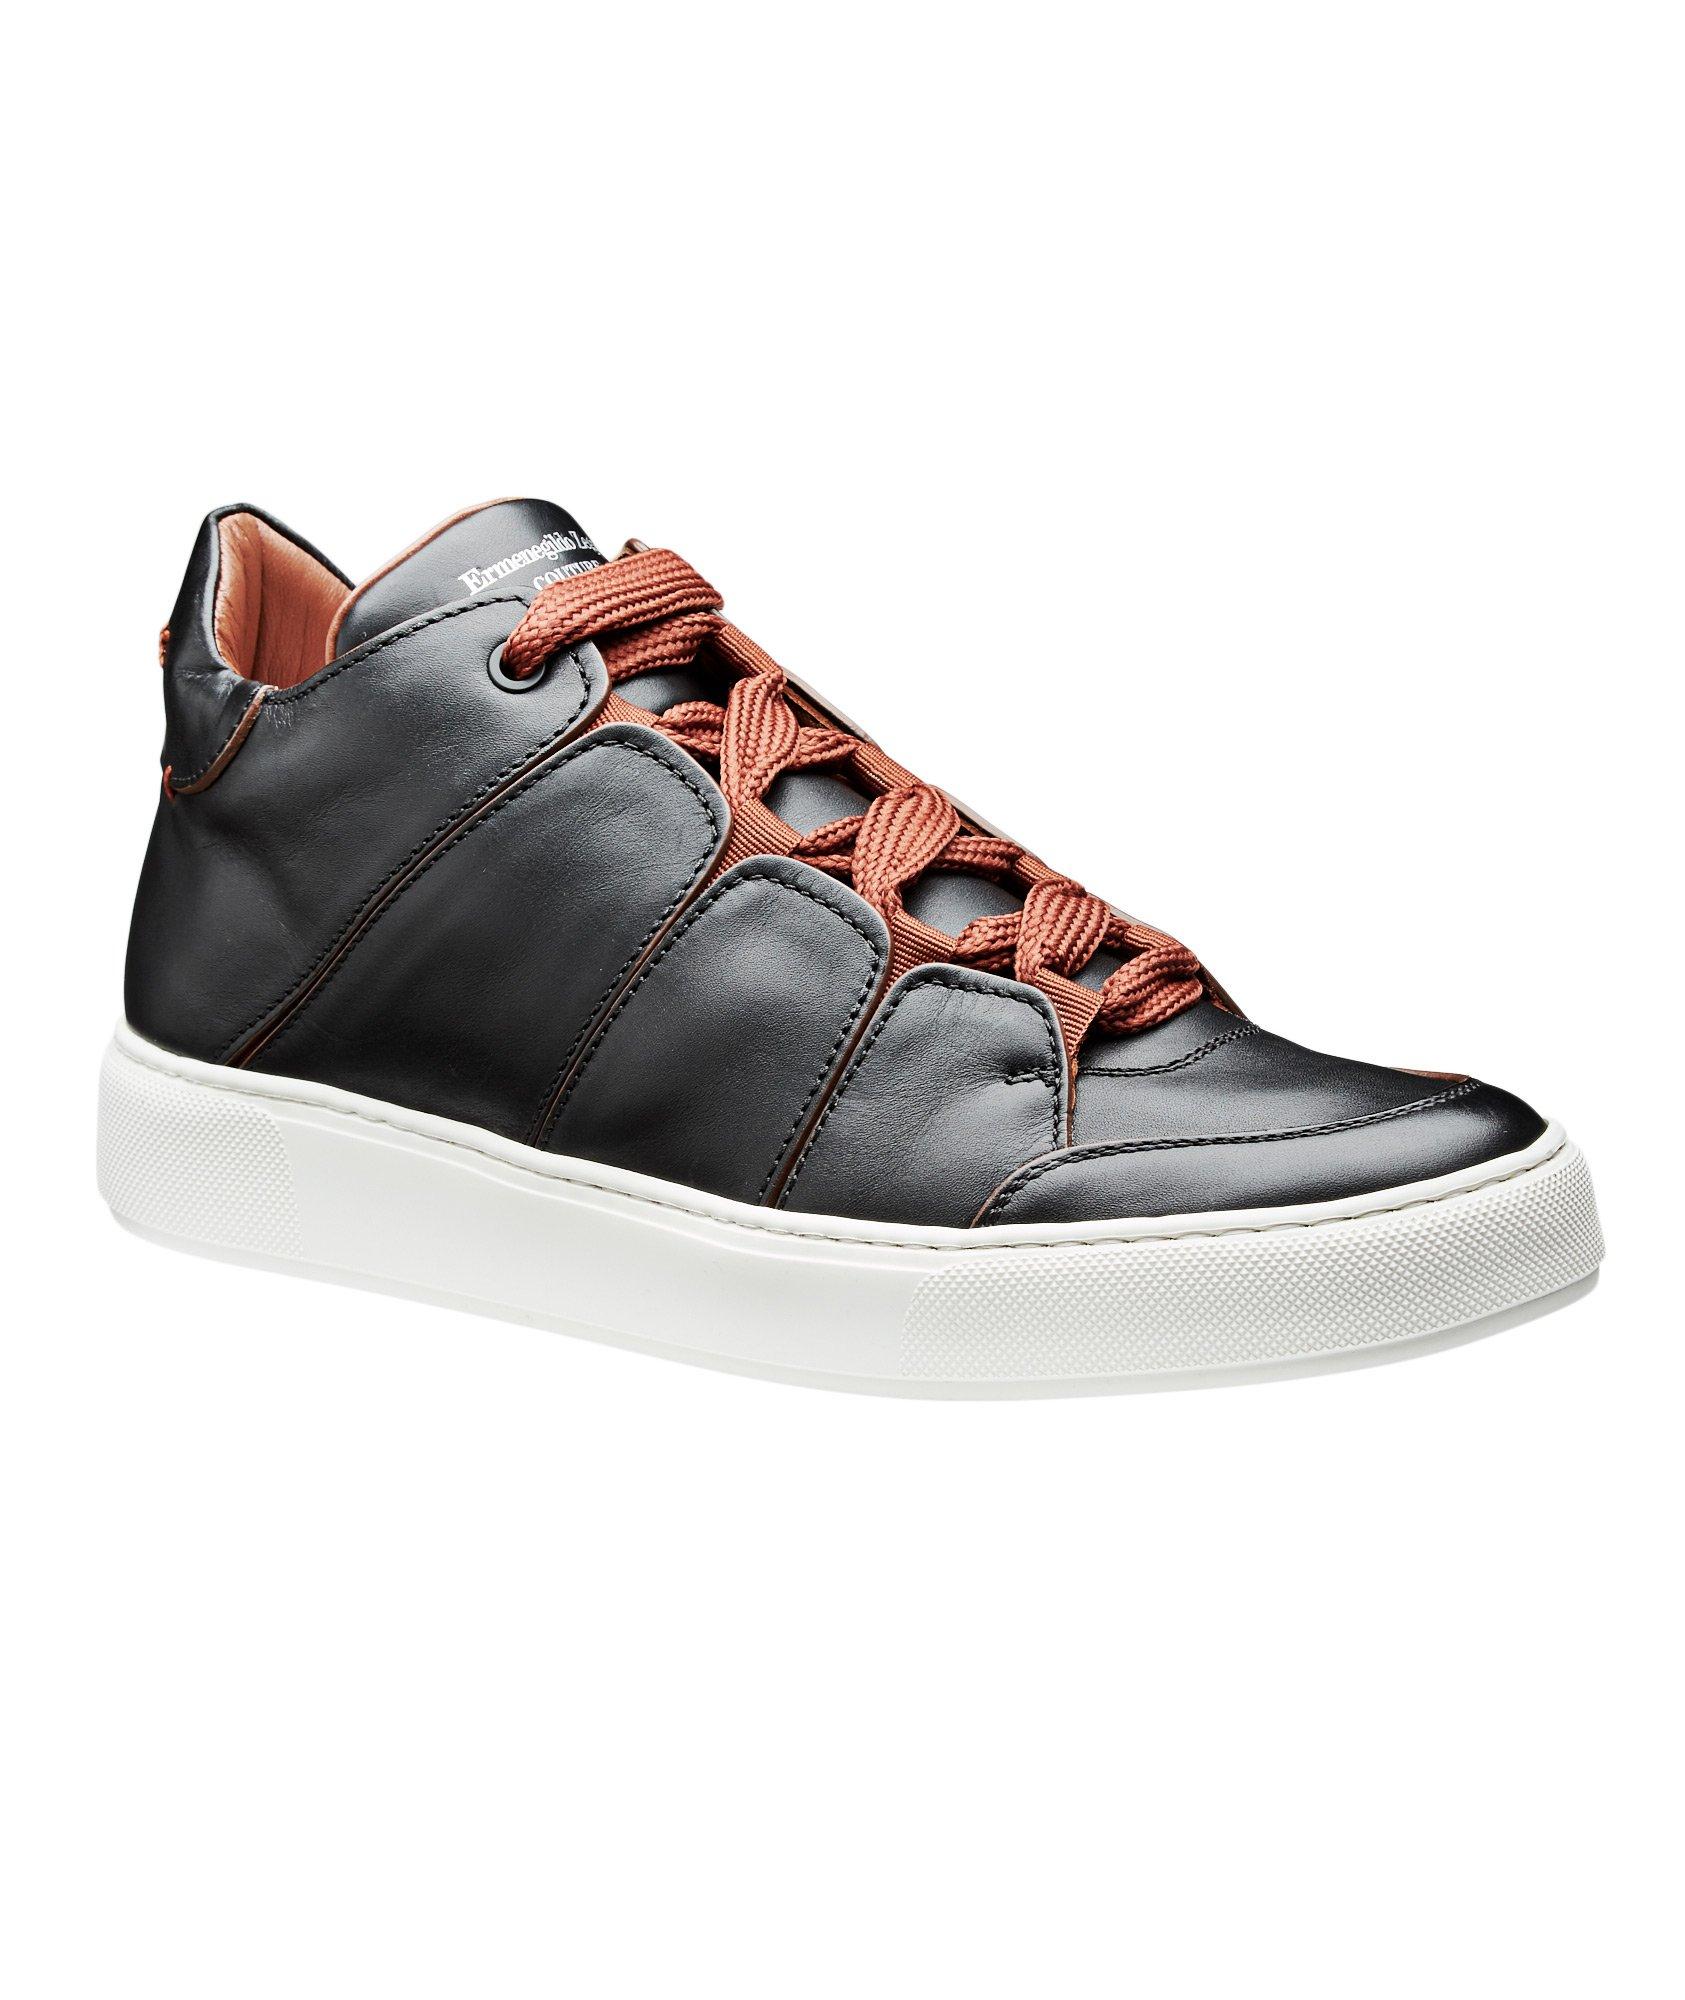 Tommaso High-Top Sneakers image 0